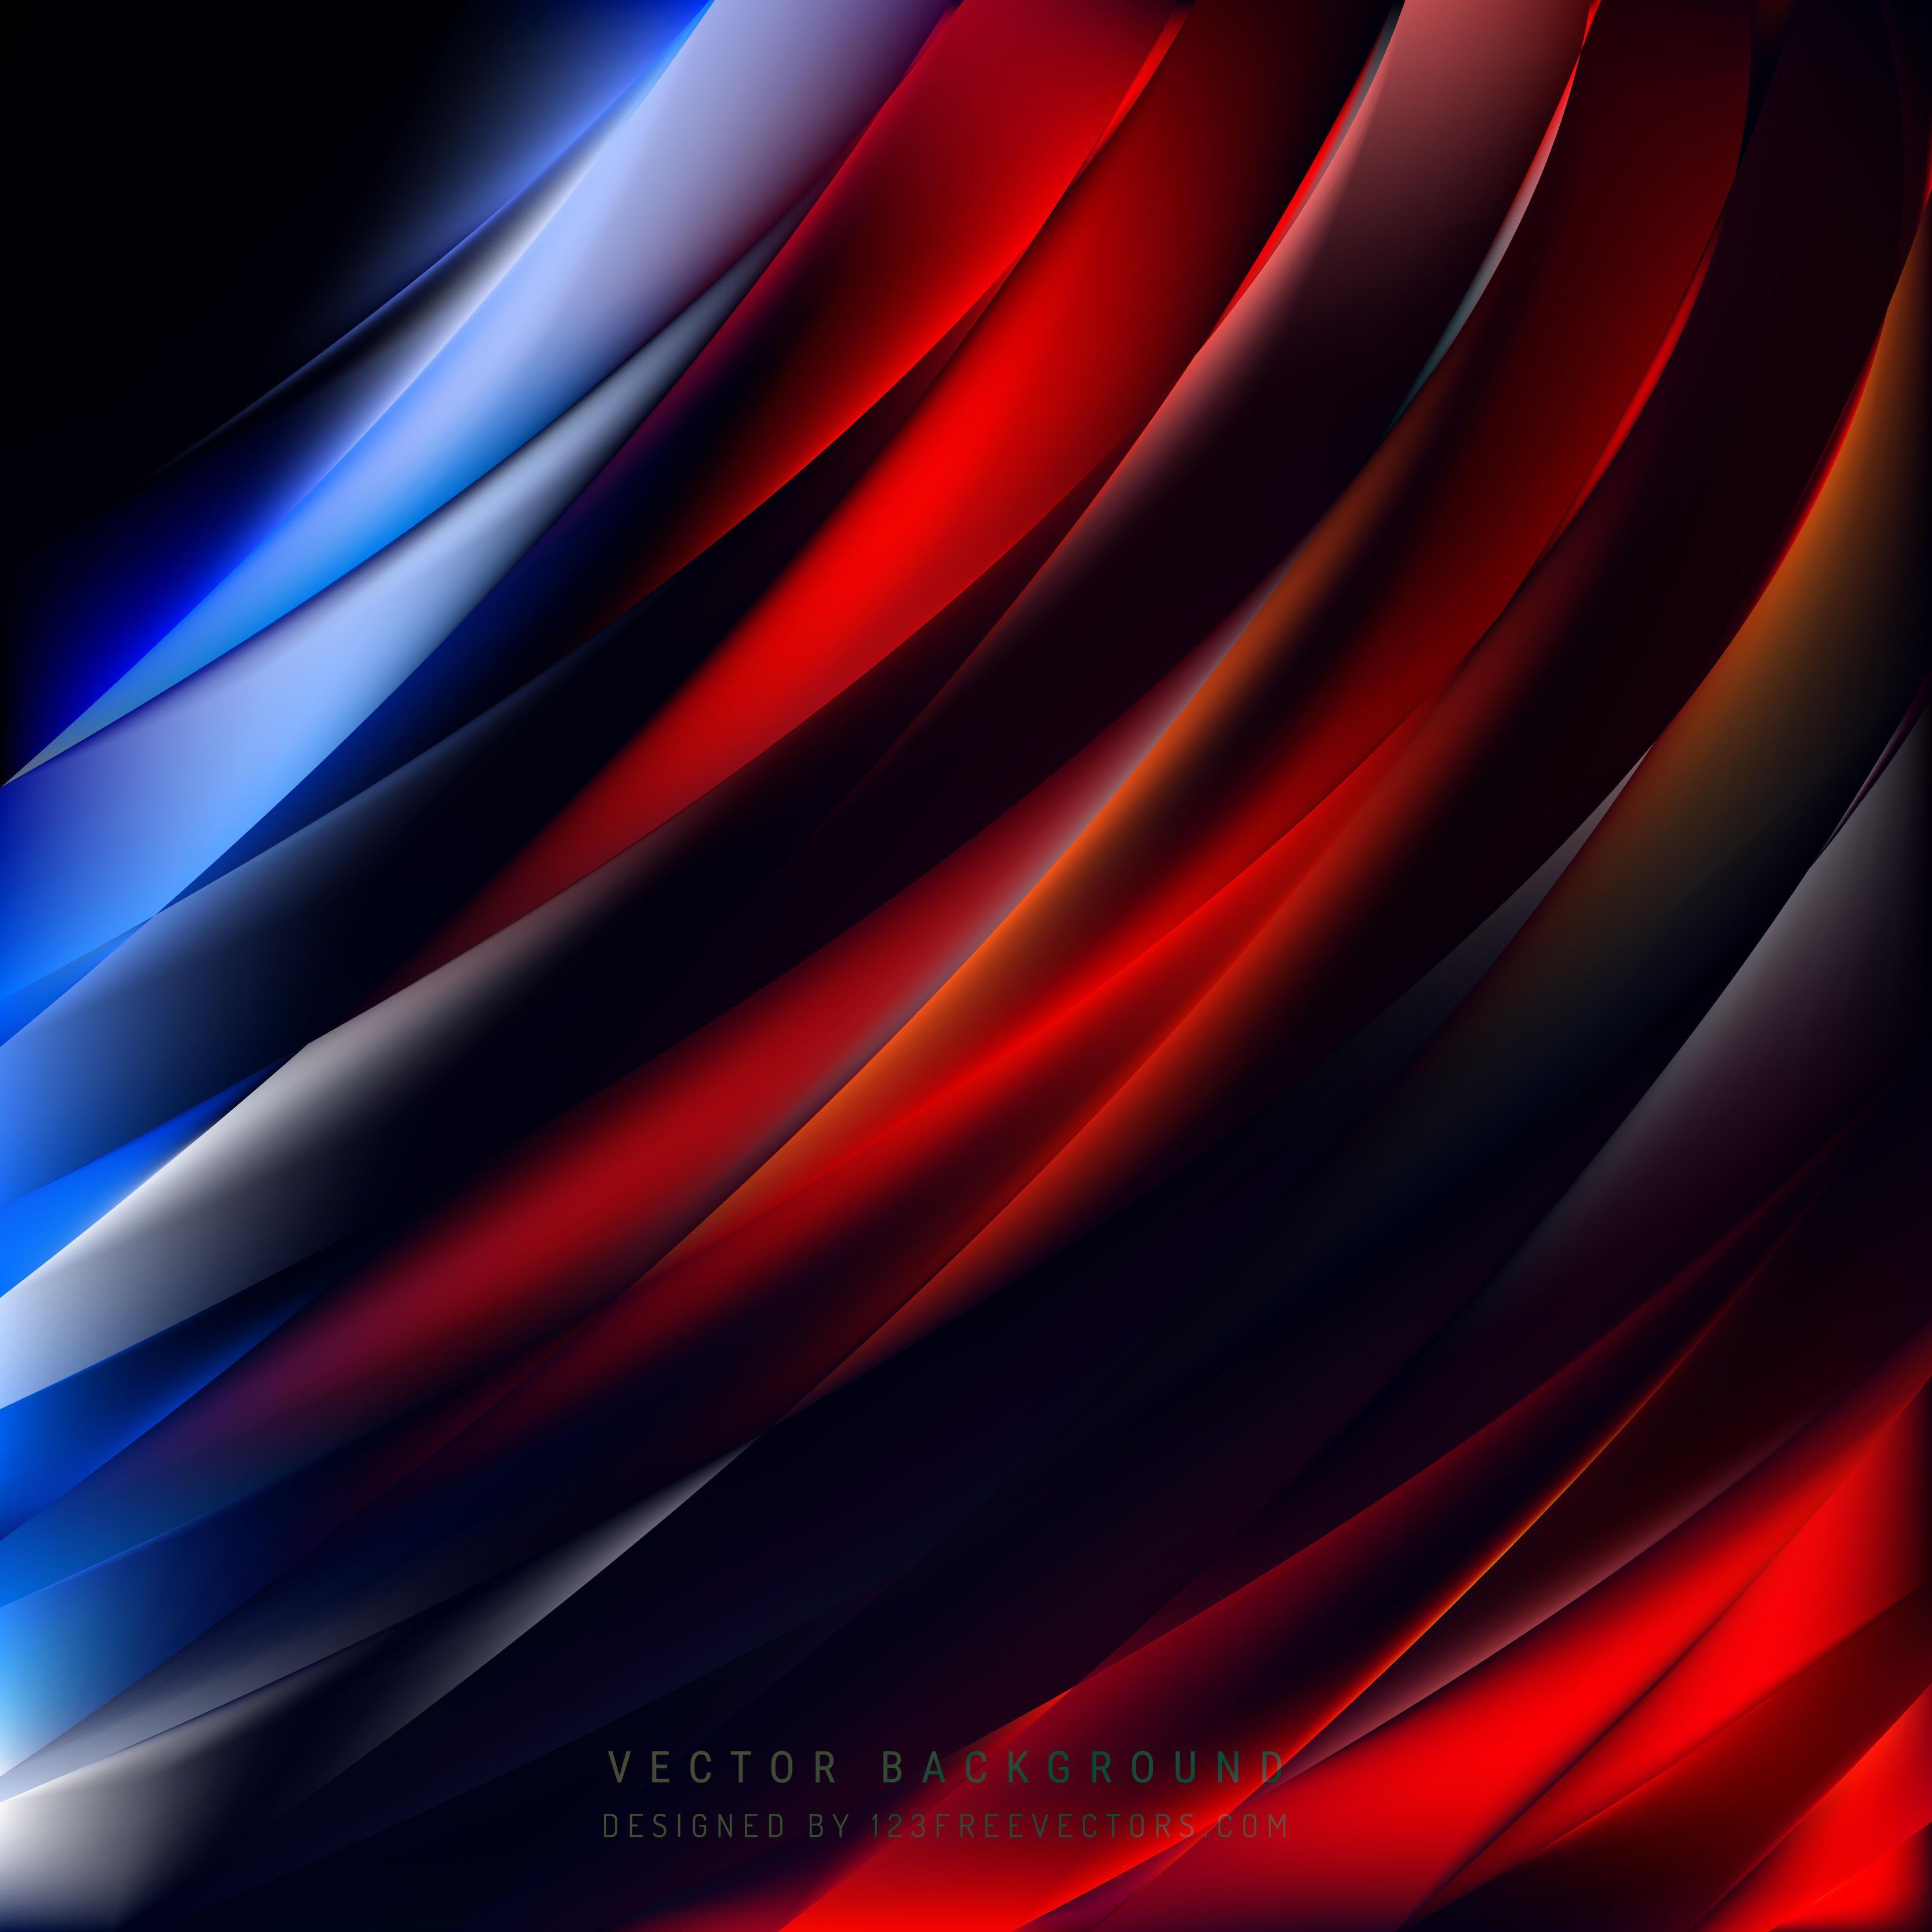 Red and Blue Background Vectors. Download Free Vector Art